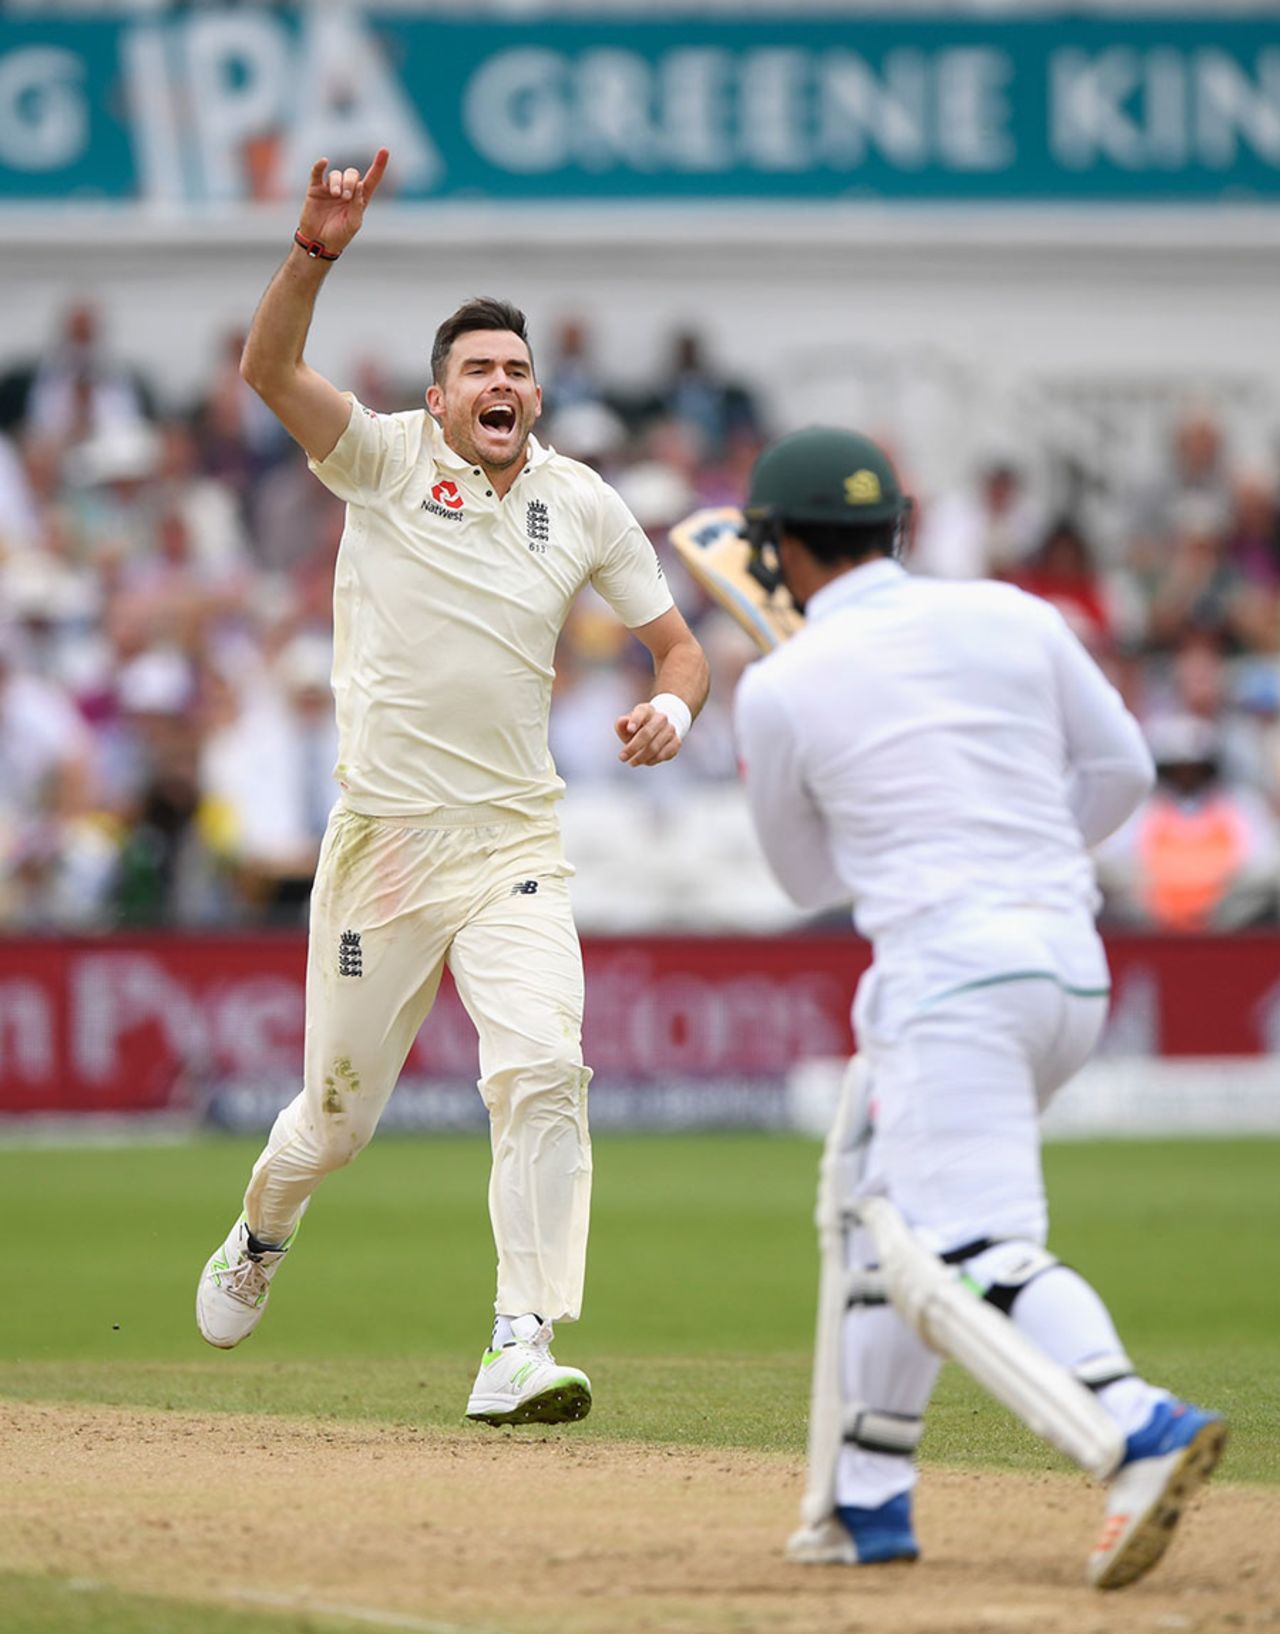 James Anderson had Quinton de Kock caught behind, England v South Africa, 2nd Investec Test, Trent Bridge, 3rd day, July 16, 2017